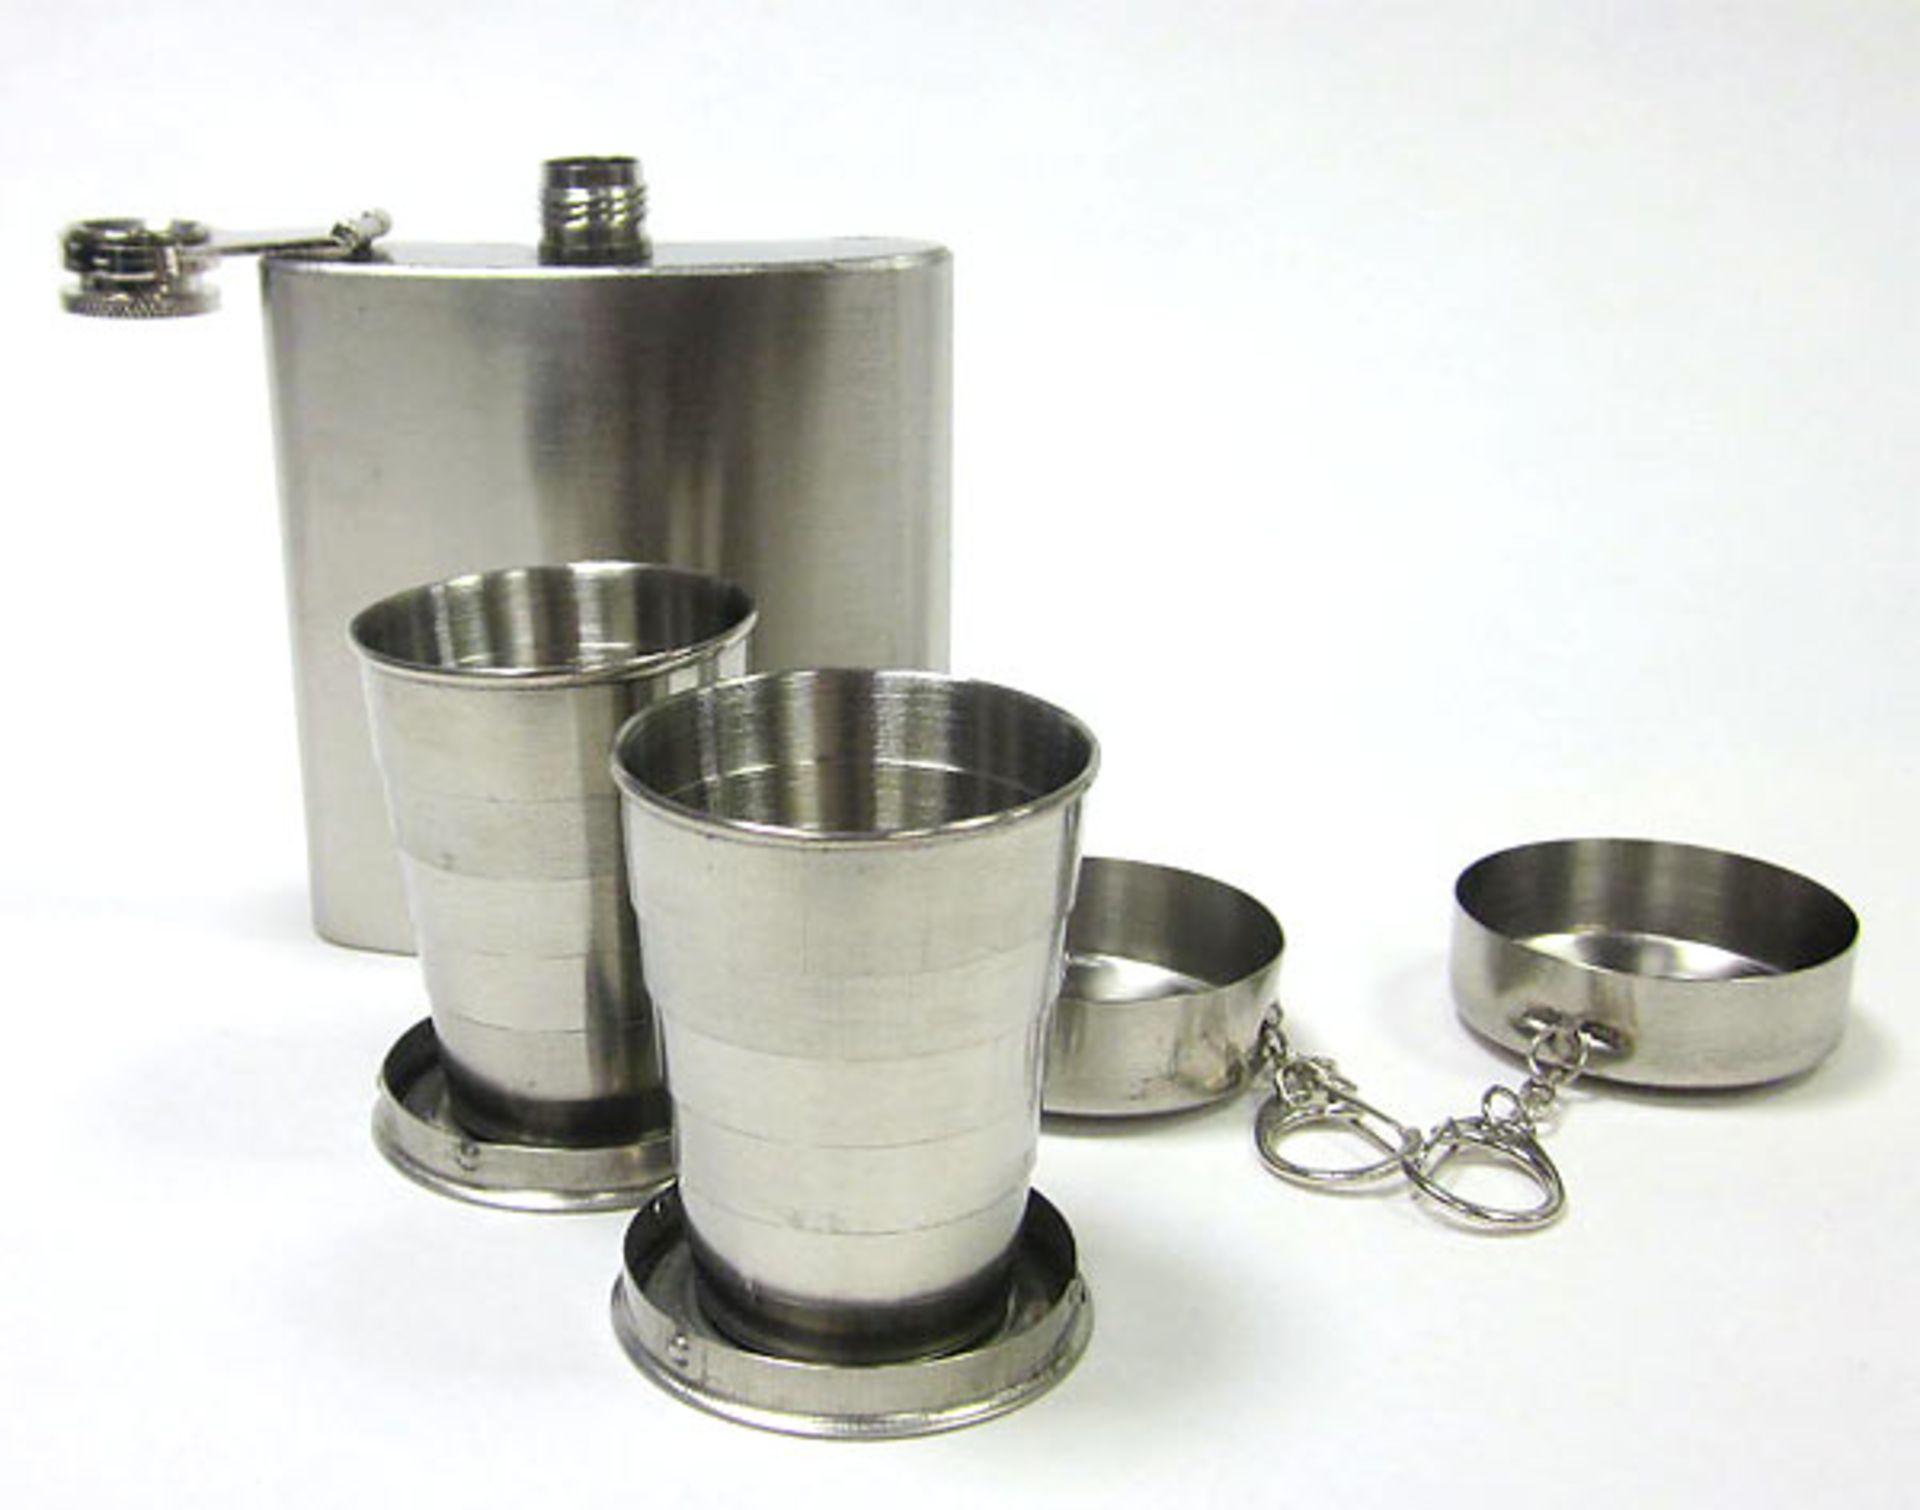 V *TRADE QTY* Brand New Stainless Steel Hip Flask And Cup Set X 5 YOUR BID PRICE TO BE MULTIPLIED BY